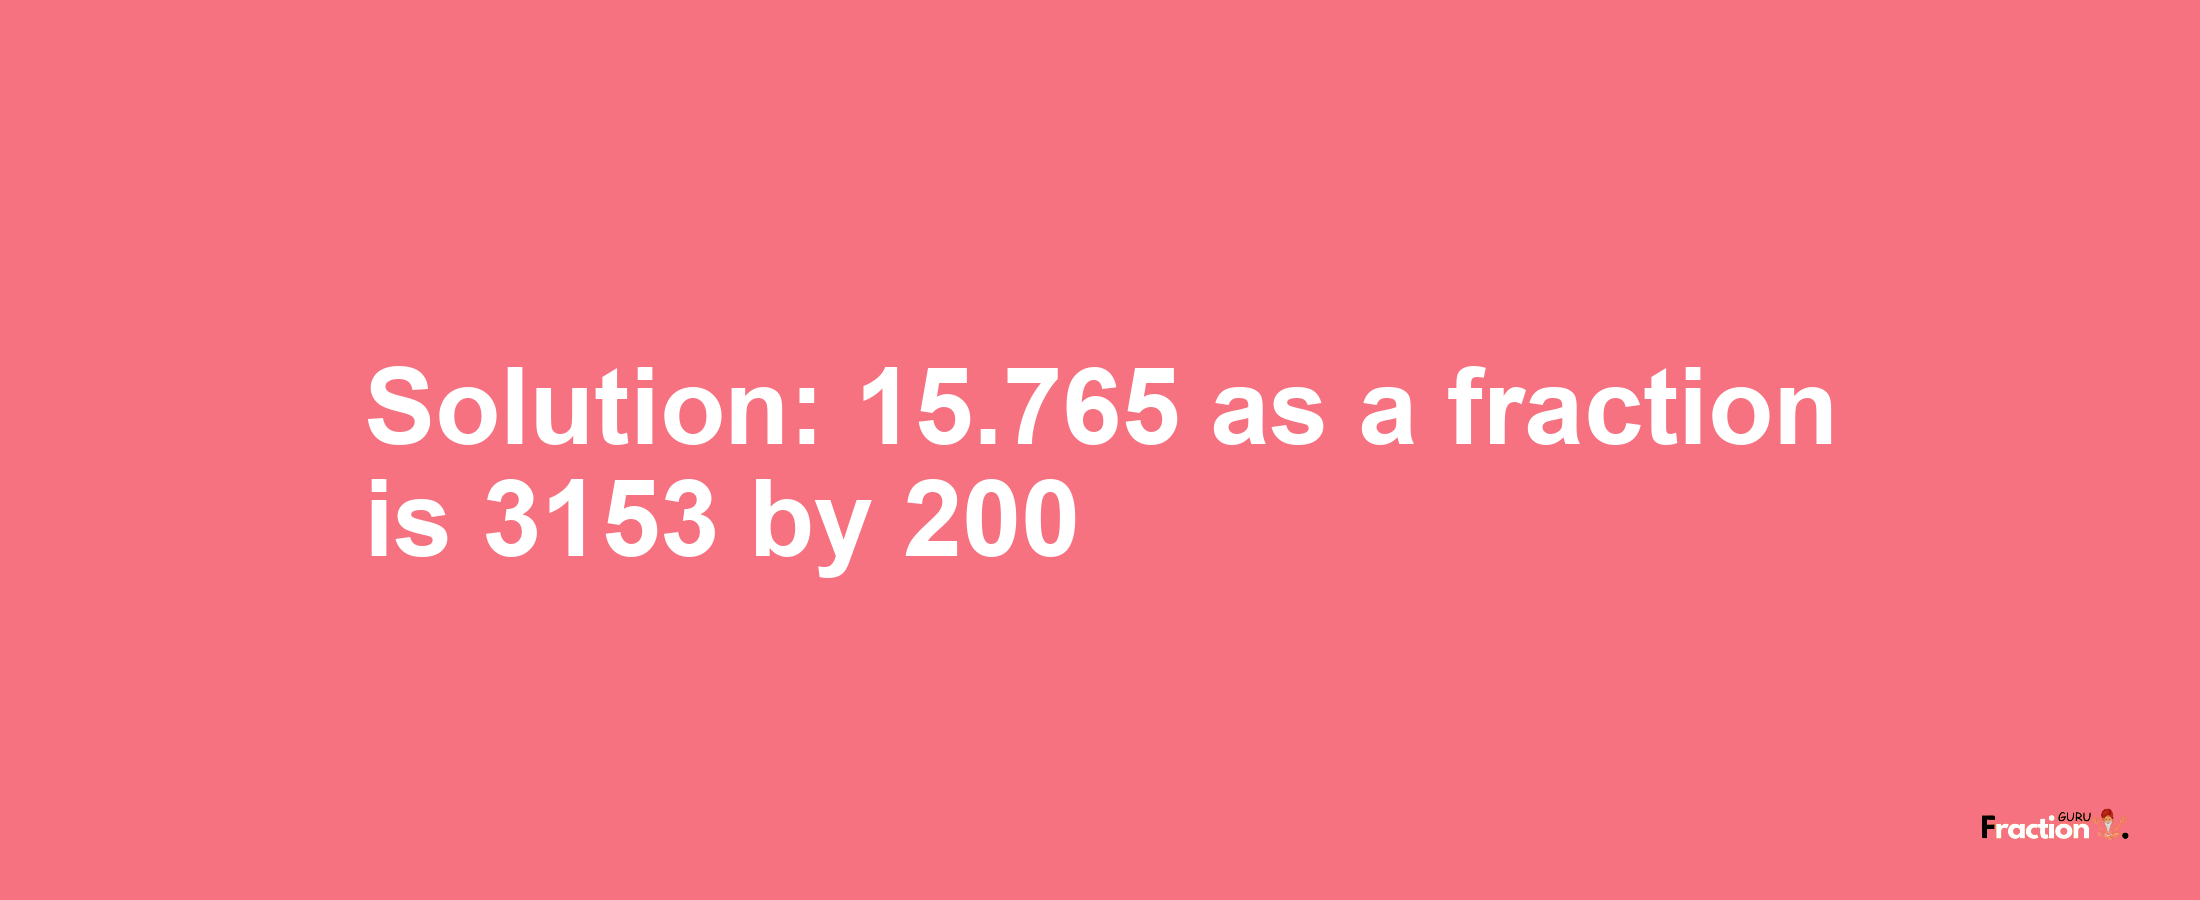 Solution:15.765 as a fraction is 3153/200